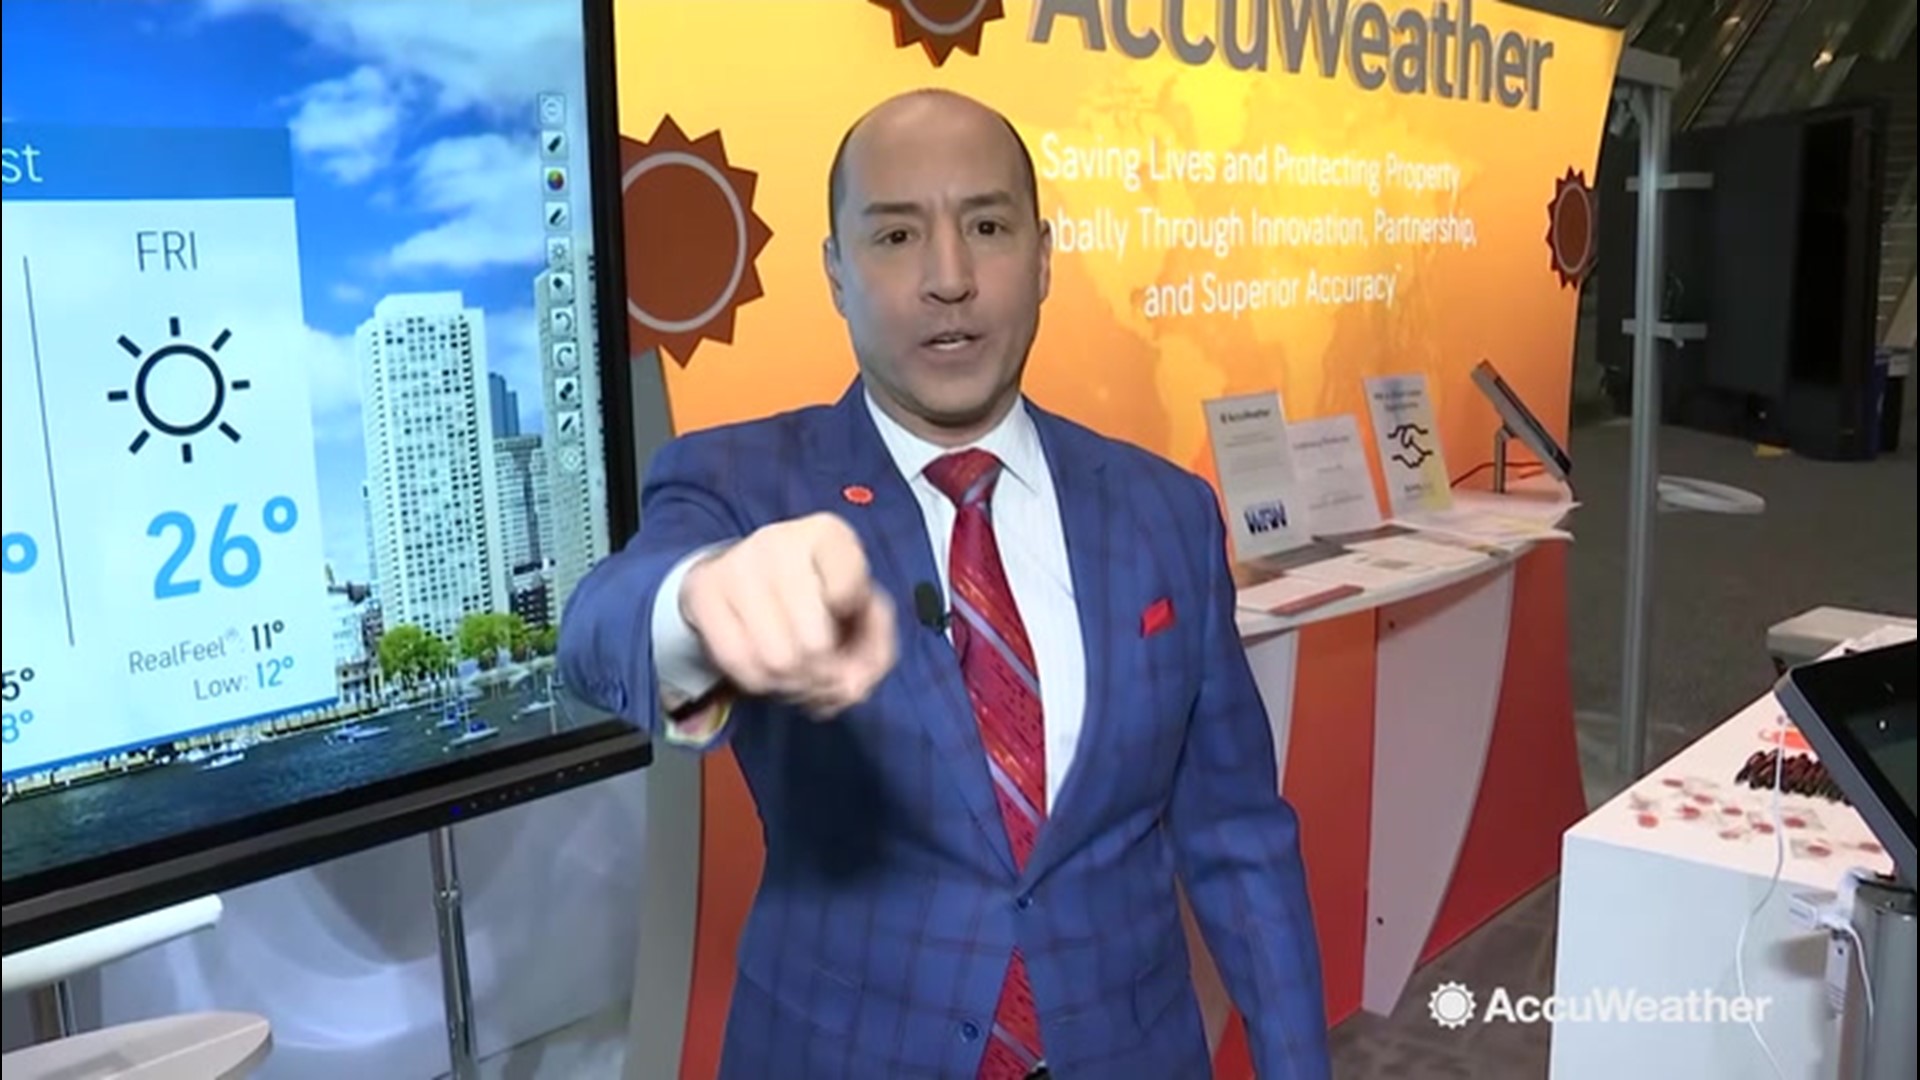 AccuWeather's Bernie Rayno gives a live Northeast forecast from the100th Annual AMS Convention in Boston, Massachusetts. The warm air in the Northeast is withering away.